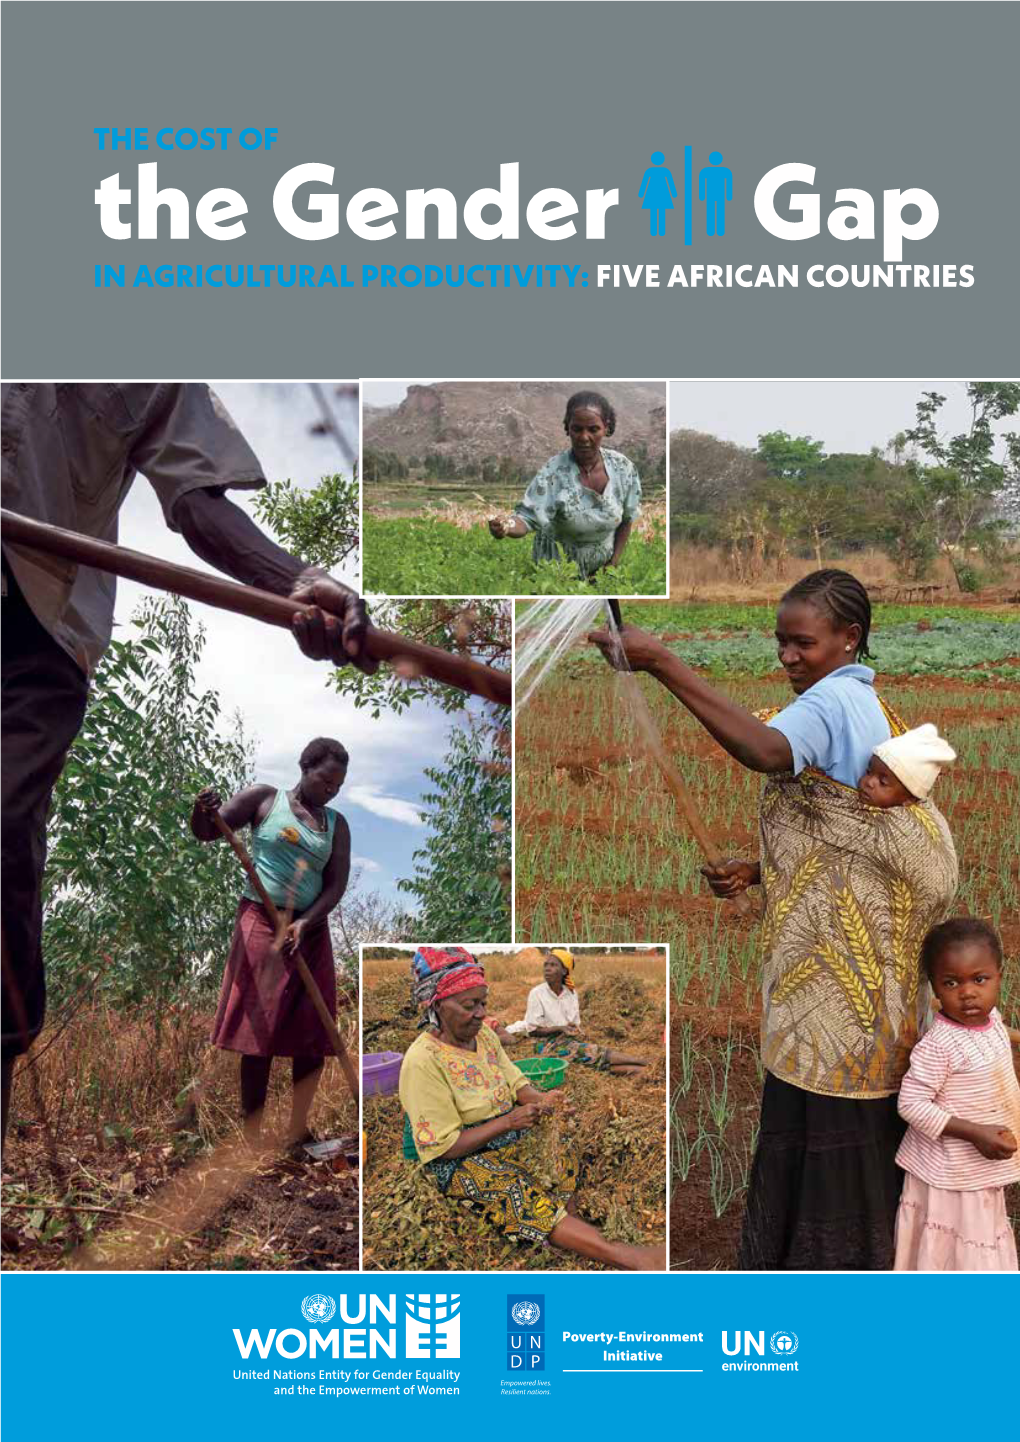 THE COST of the Gender  Gap in AGRICULTURAL PRODUCTIVITY: FIVE AFRICAN COUNTRIES